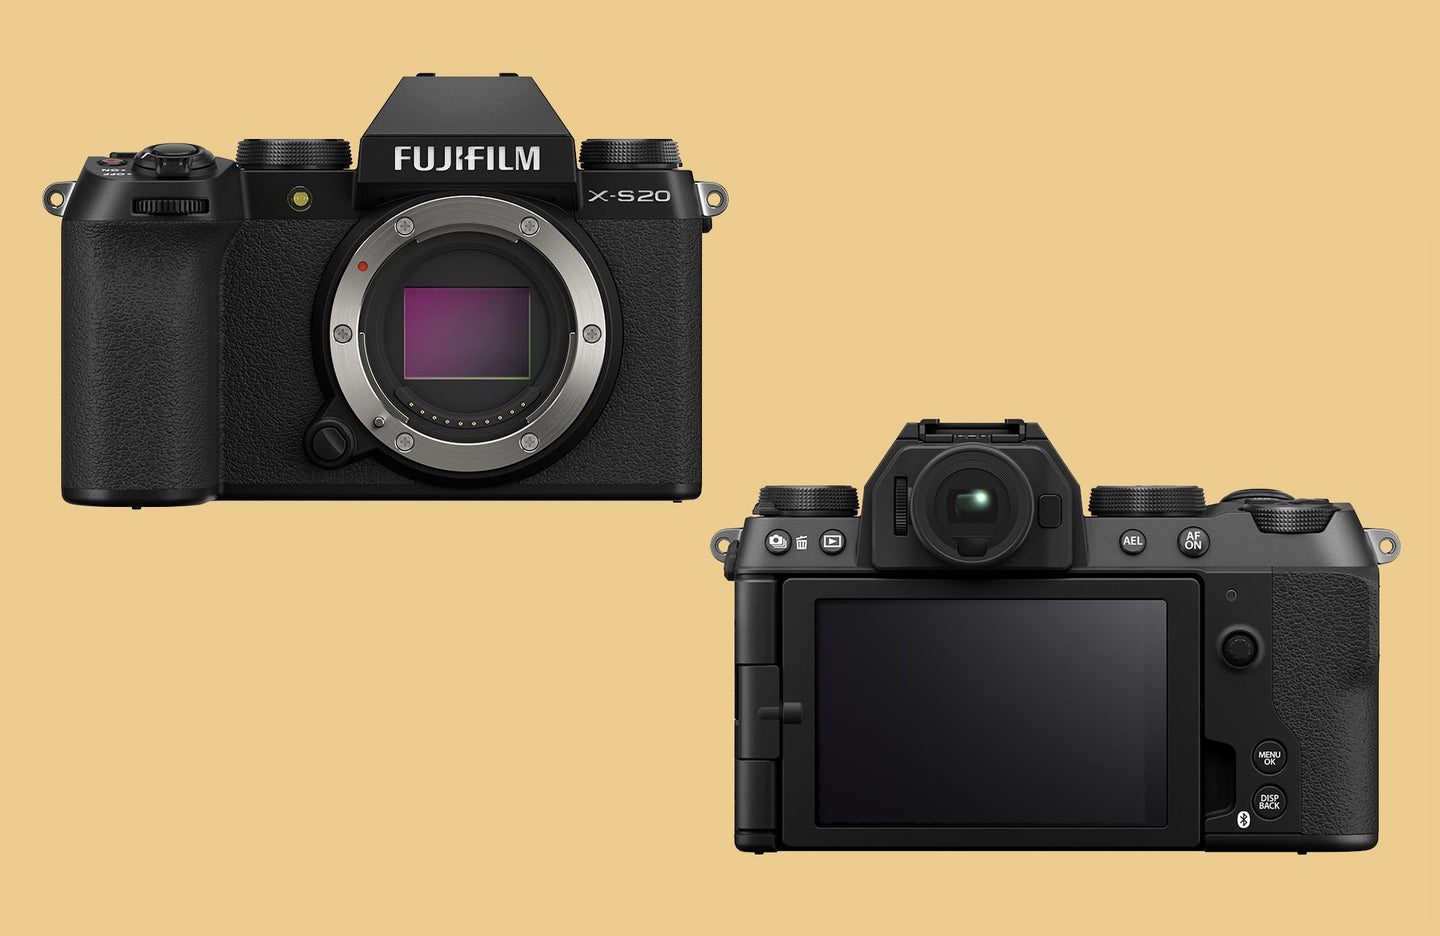 Fujifilm X-S20 mirrorless camera front and back on a yellow background